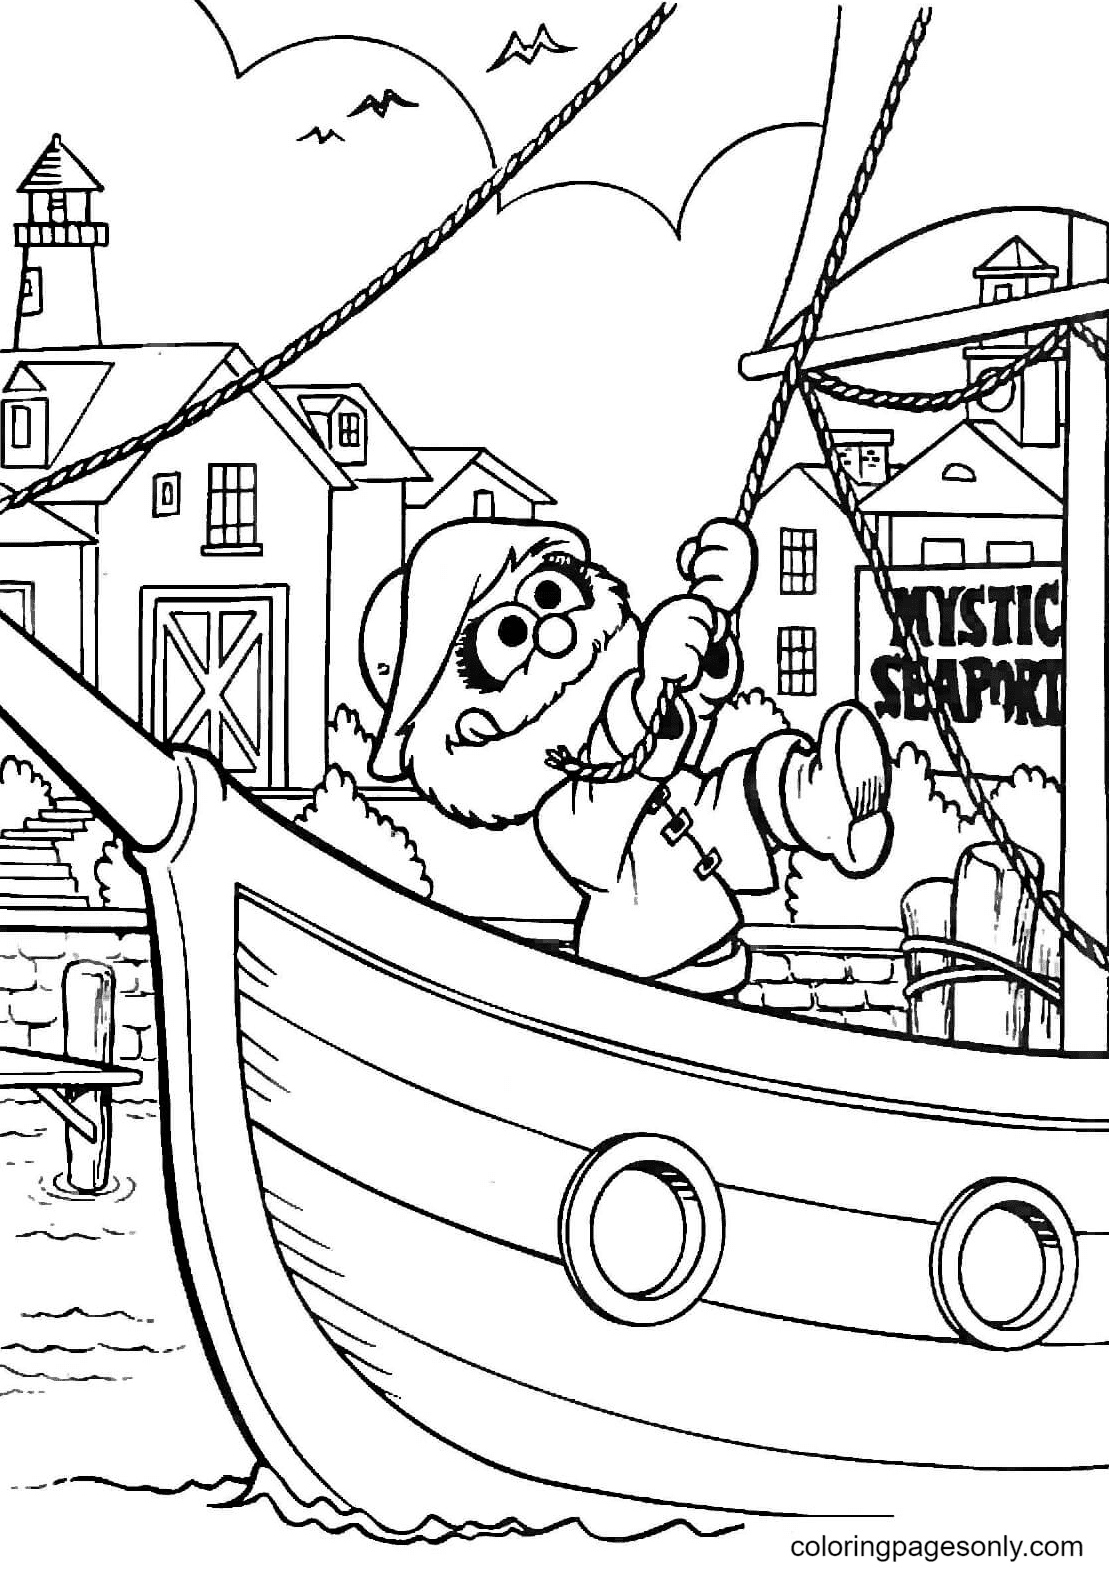 Animal on the boat at Mystic Seaport Coloring Pages